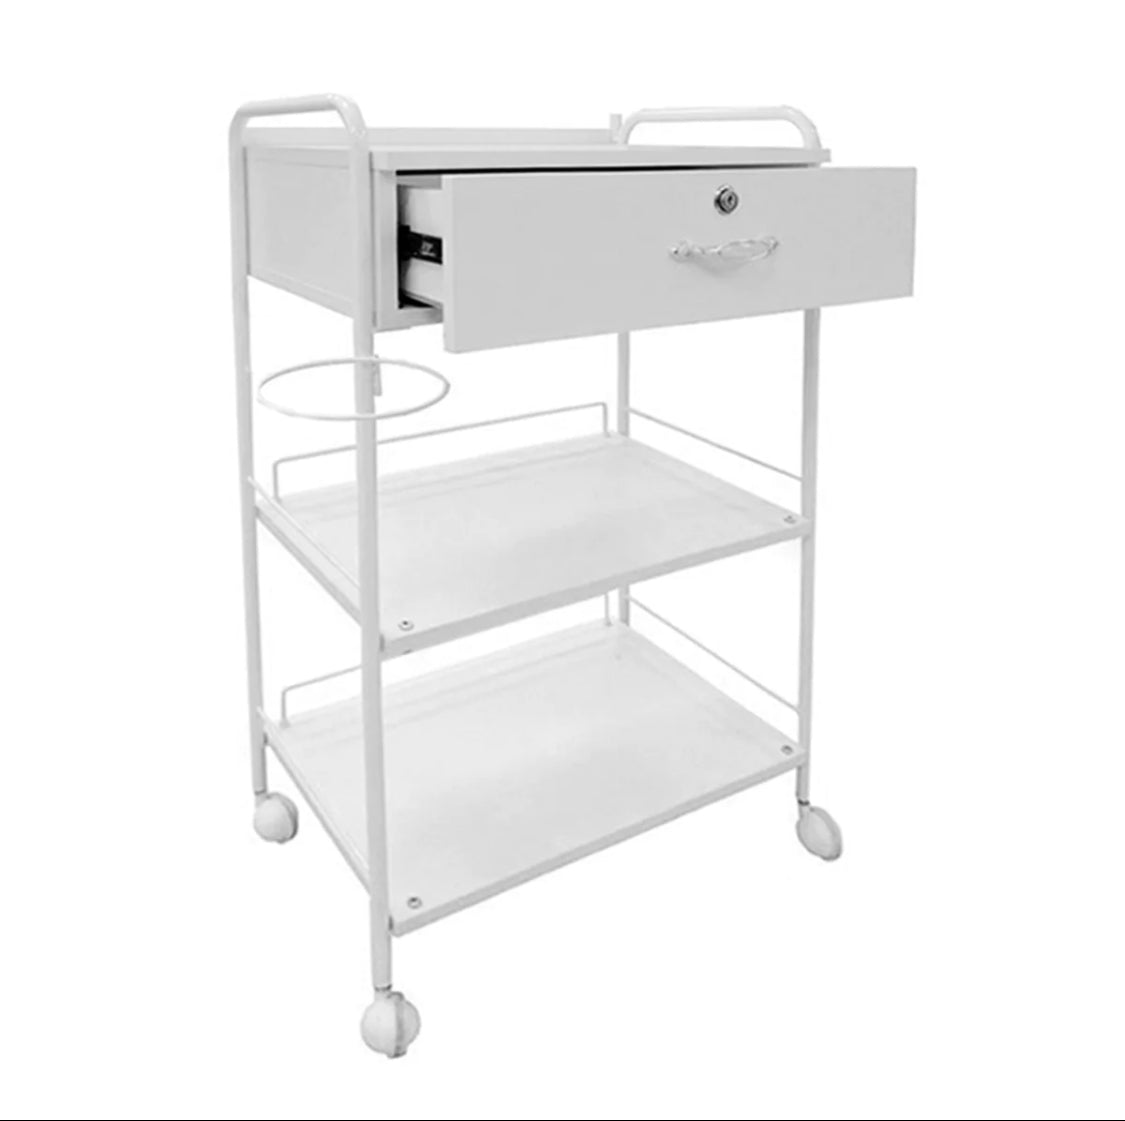 Facial Trolley with Lockable Drawer + Lamp Holder - Beauty Pro Supplies Canada